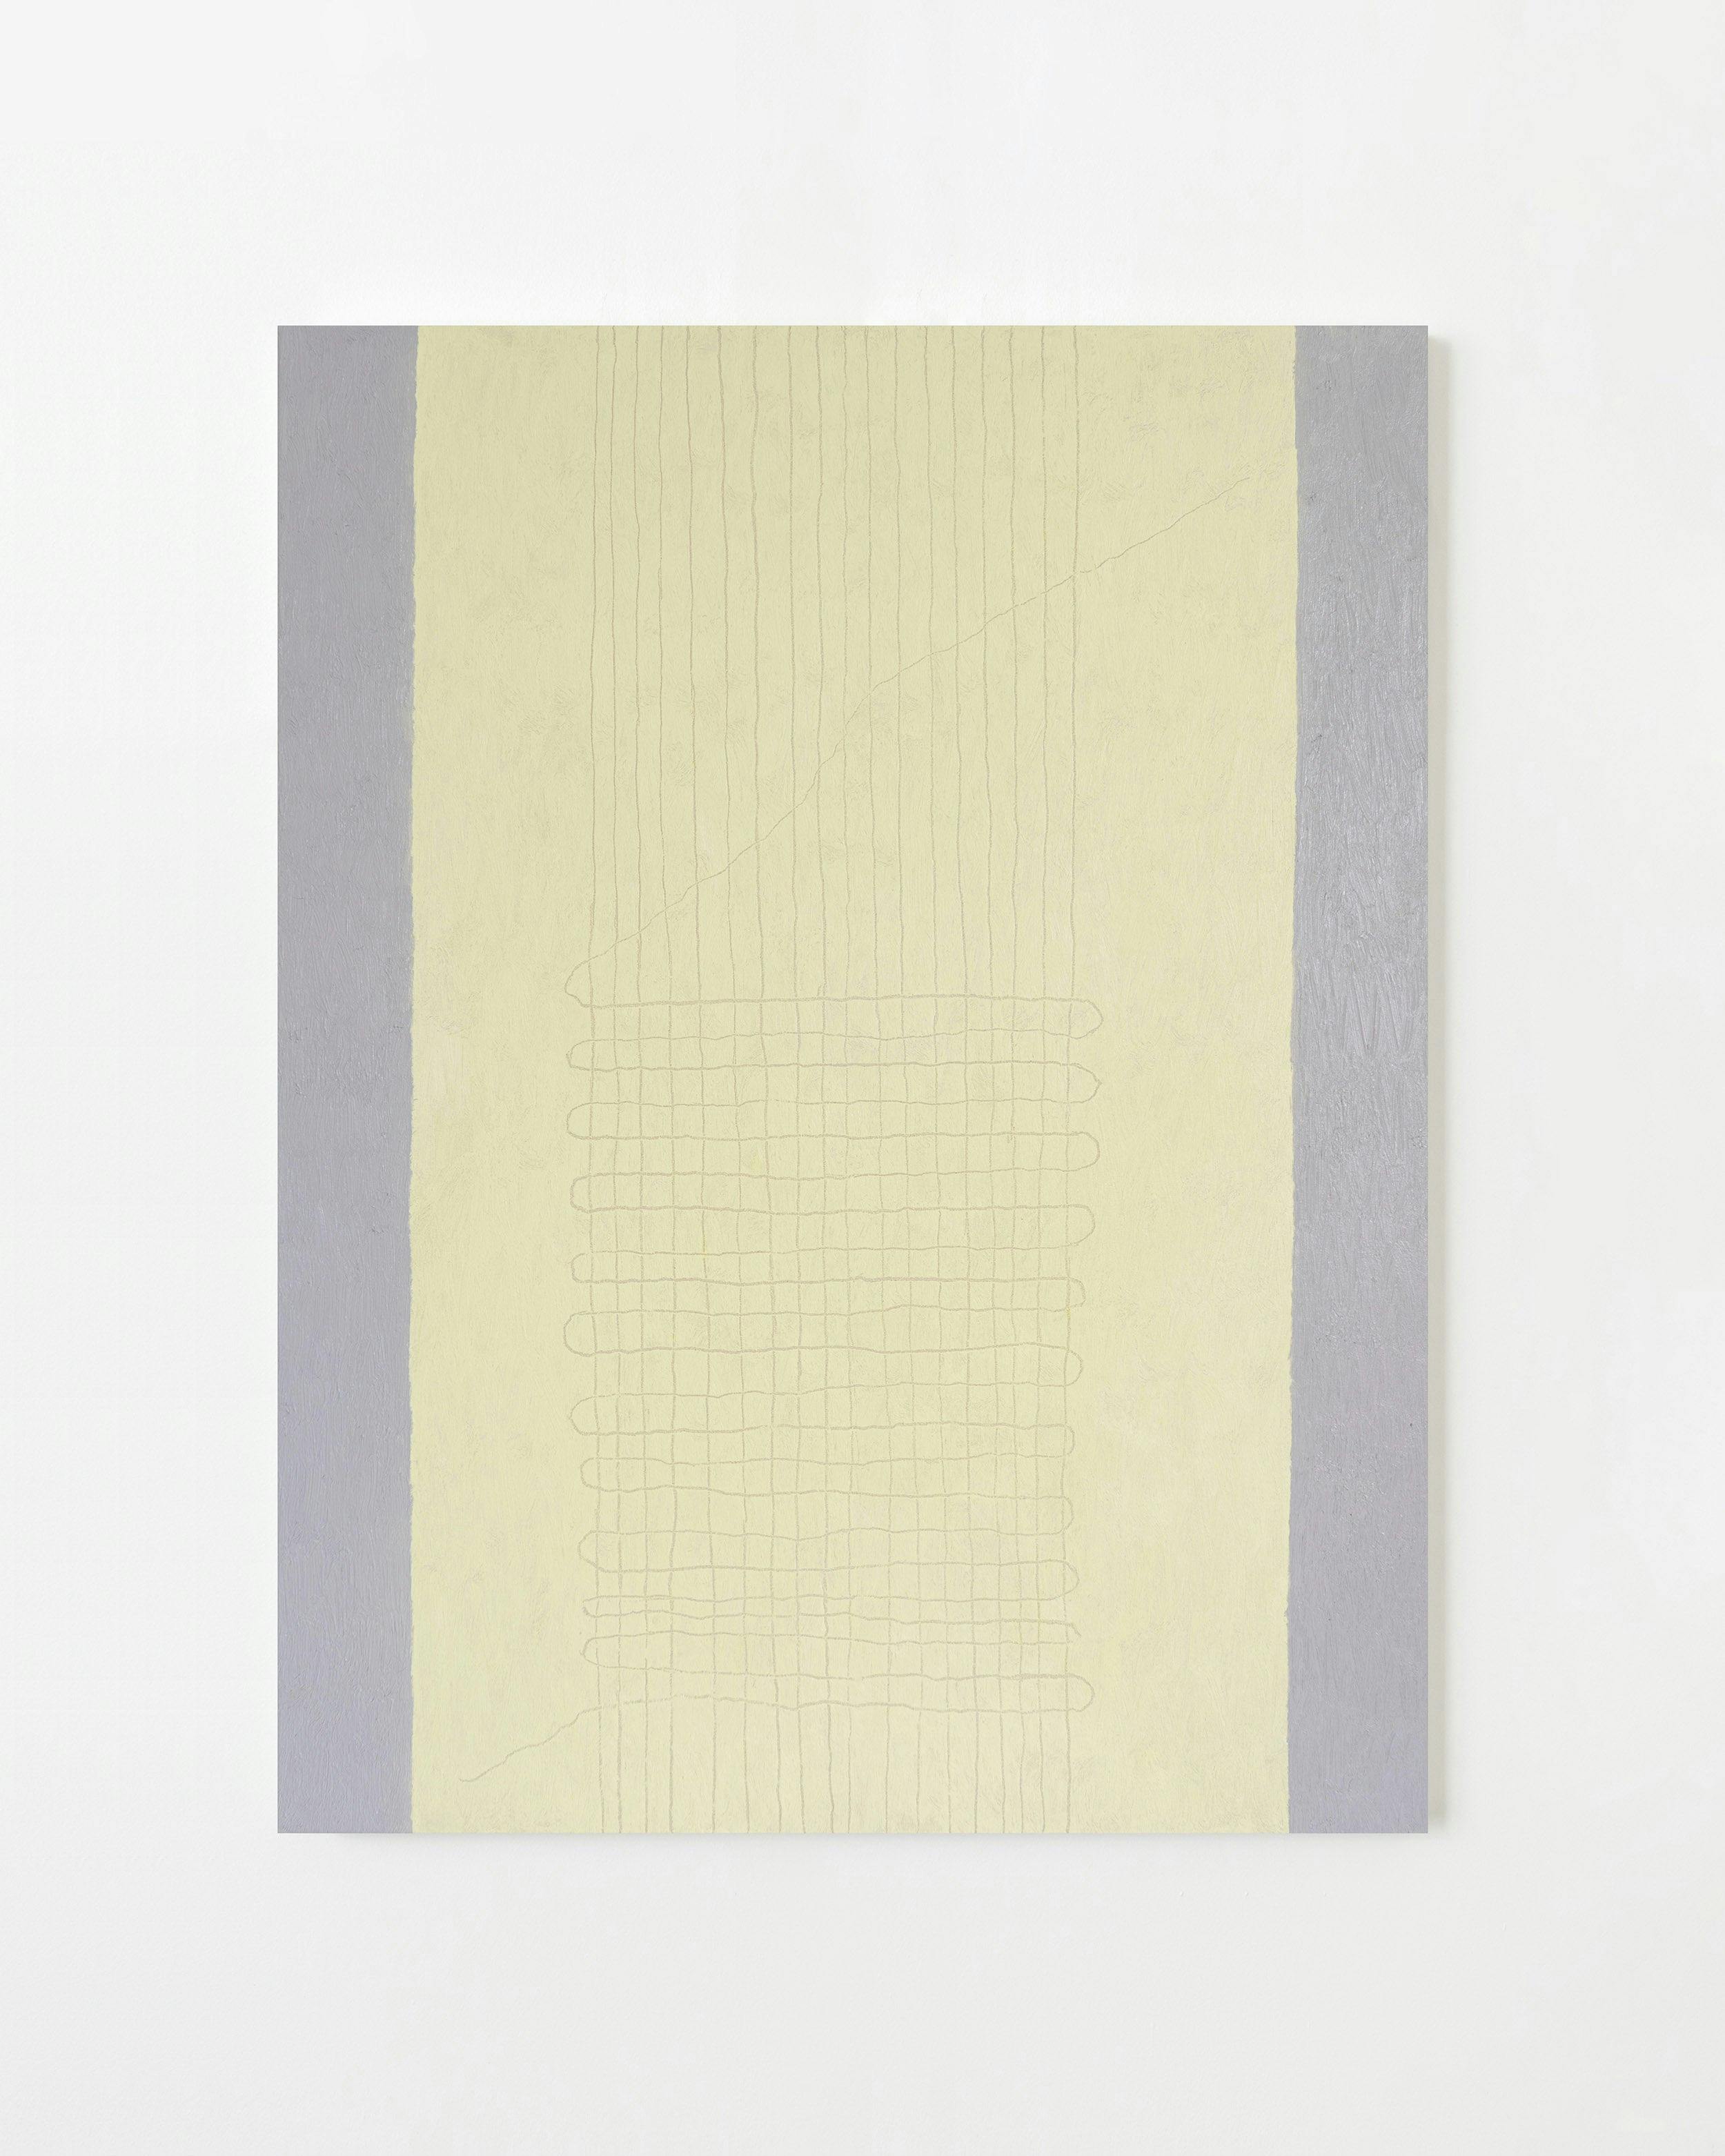 Painting by Aschely Vaughan Cone titled "Pale Loom I, Found Thread, Yellow and Grey".